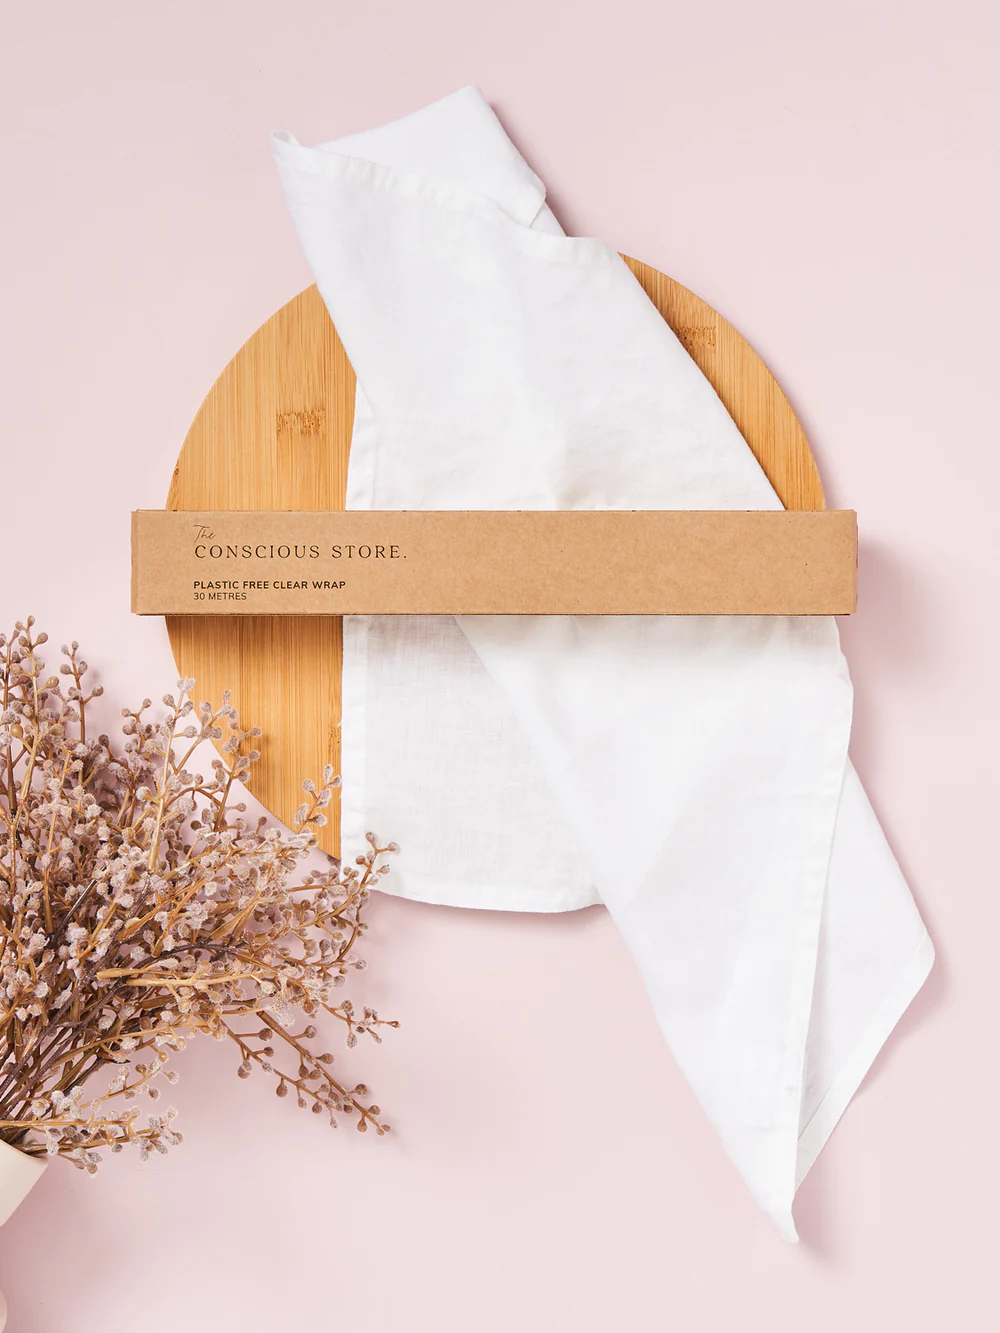 The Conscious Store - Plastic Free Clear Wrap